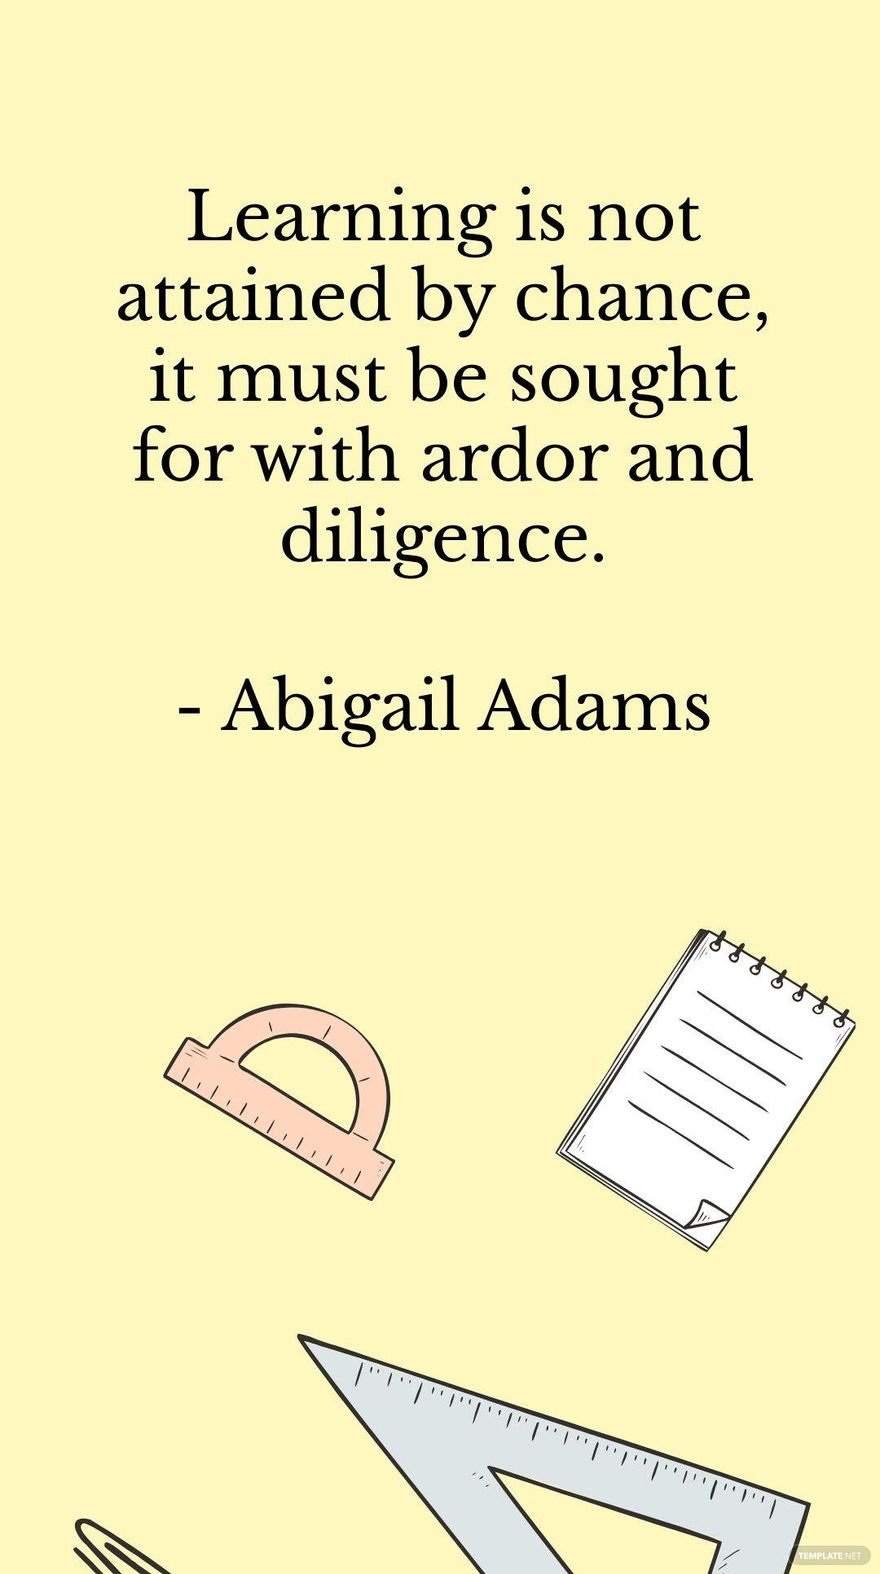 Free Abigail Adams - Learning is not attained by chance, it must be sought for with ardor and diligence. in JPG